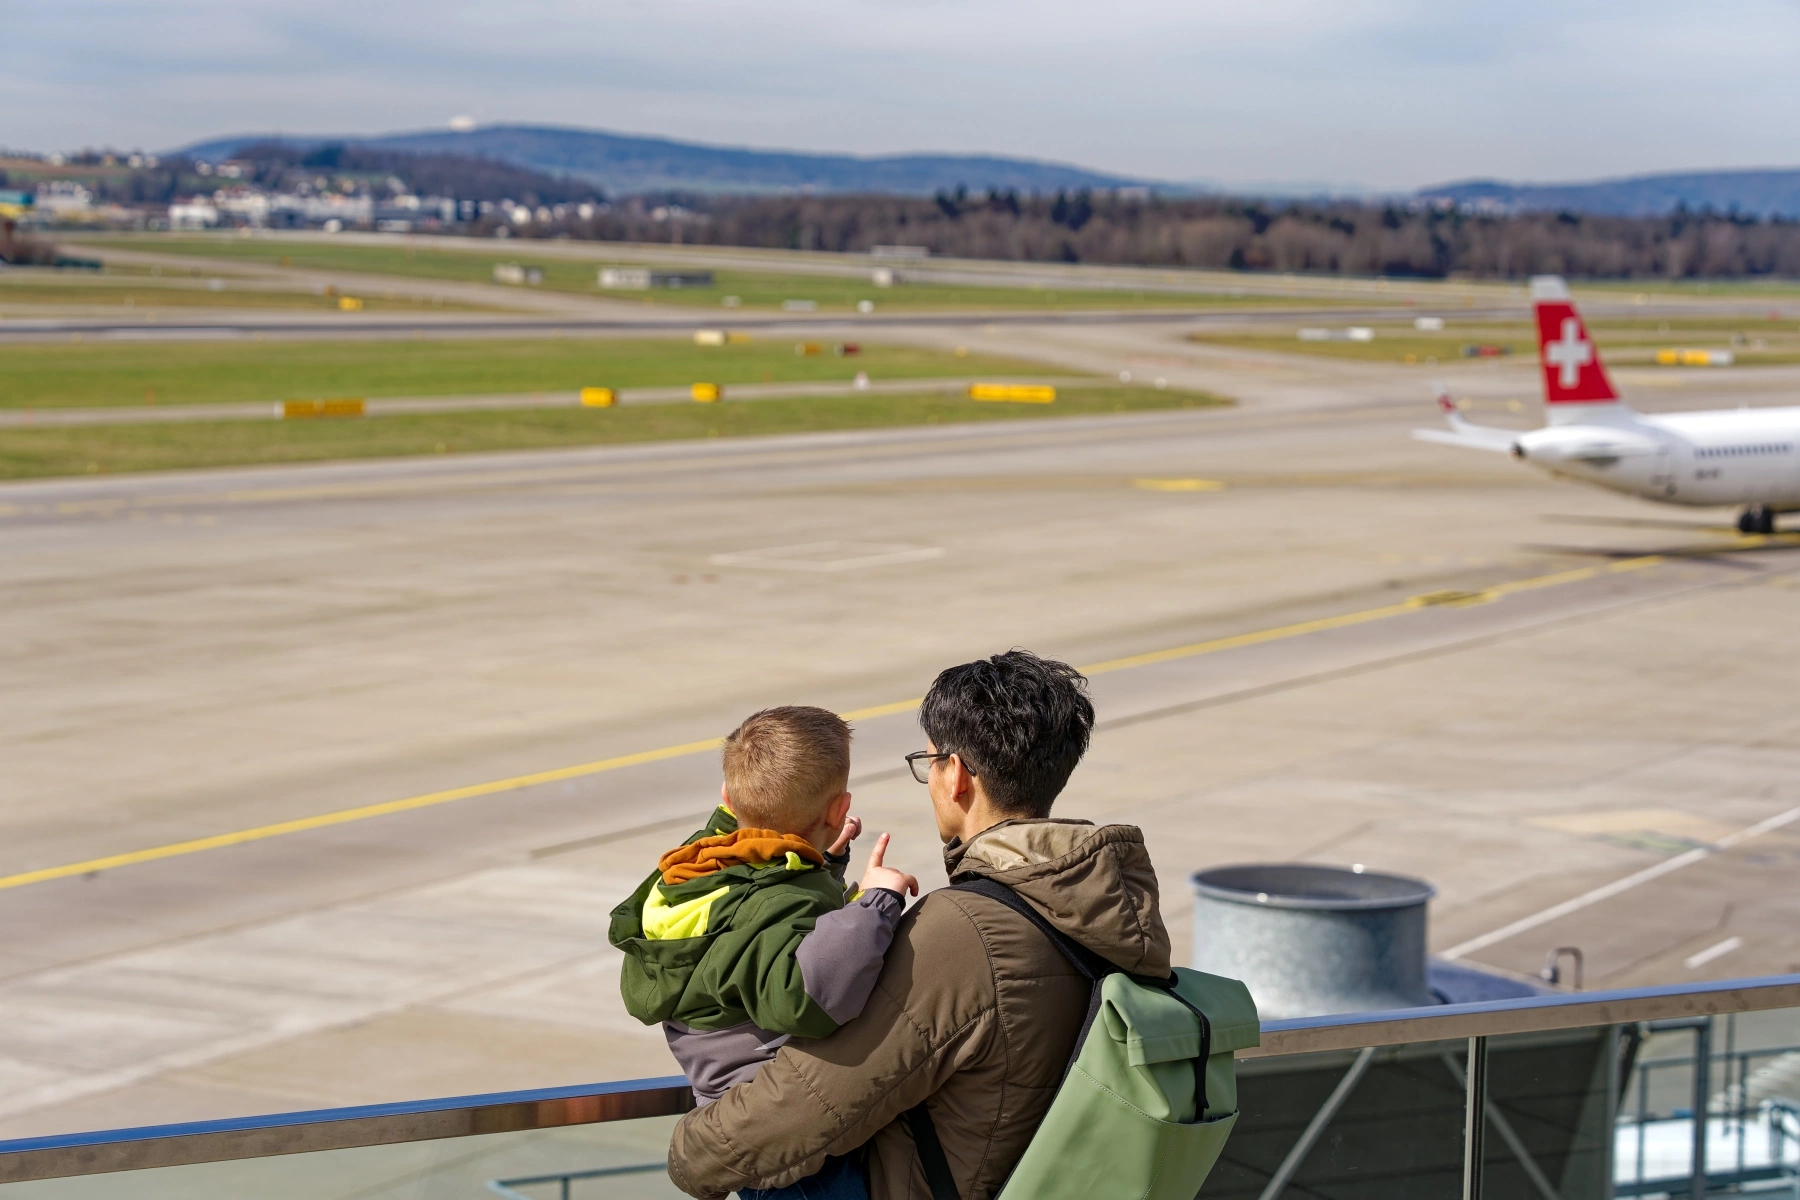 Father holds child as they look out at an airplane runway with s Swiss plane